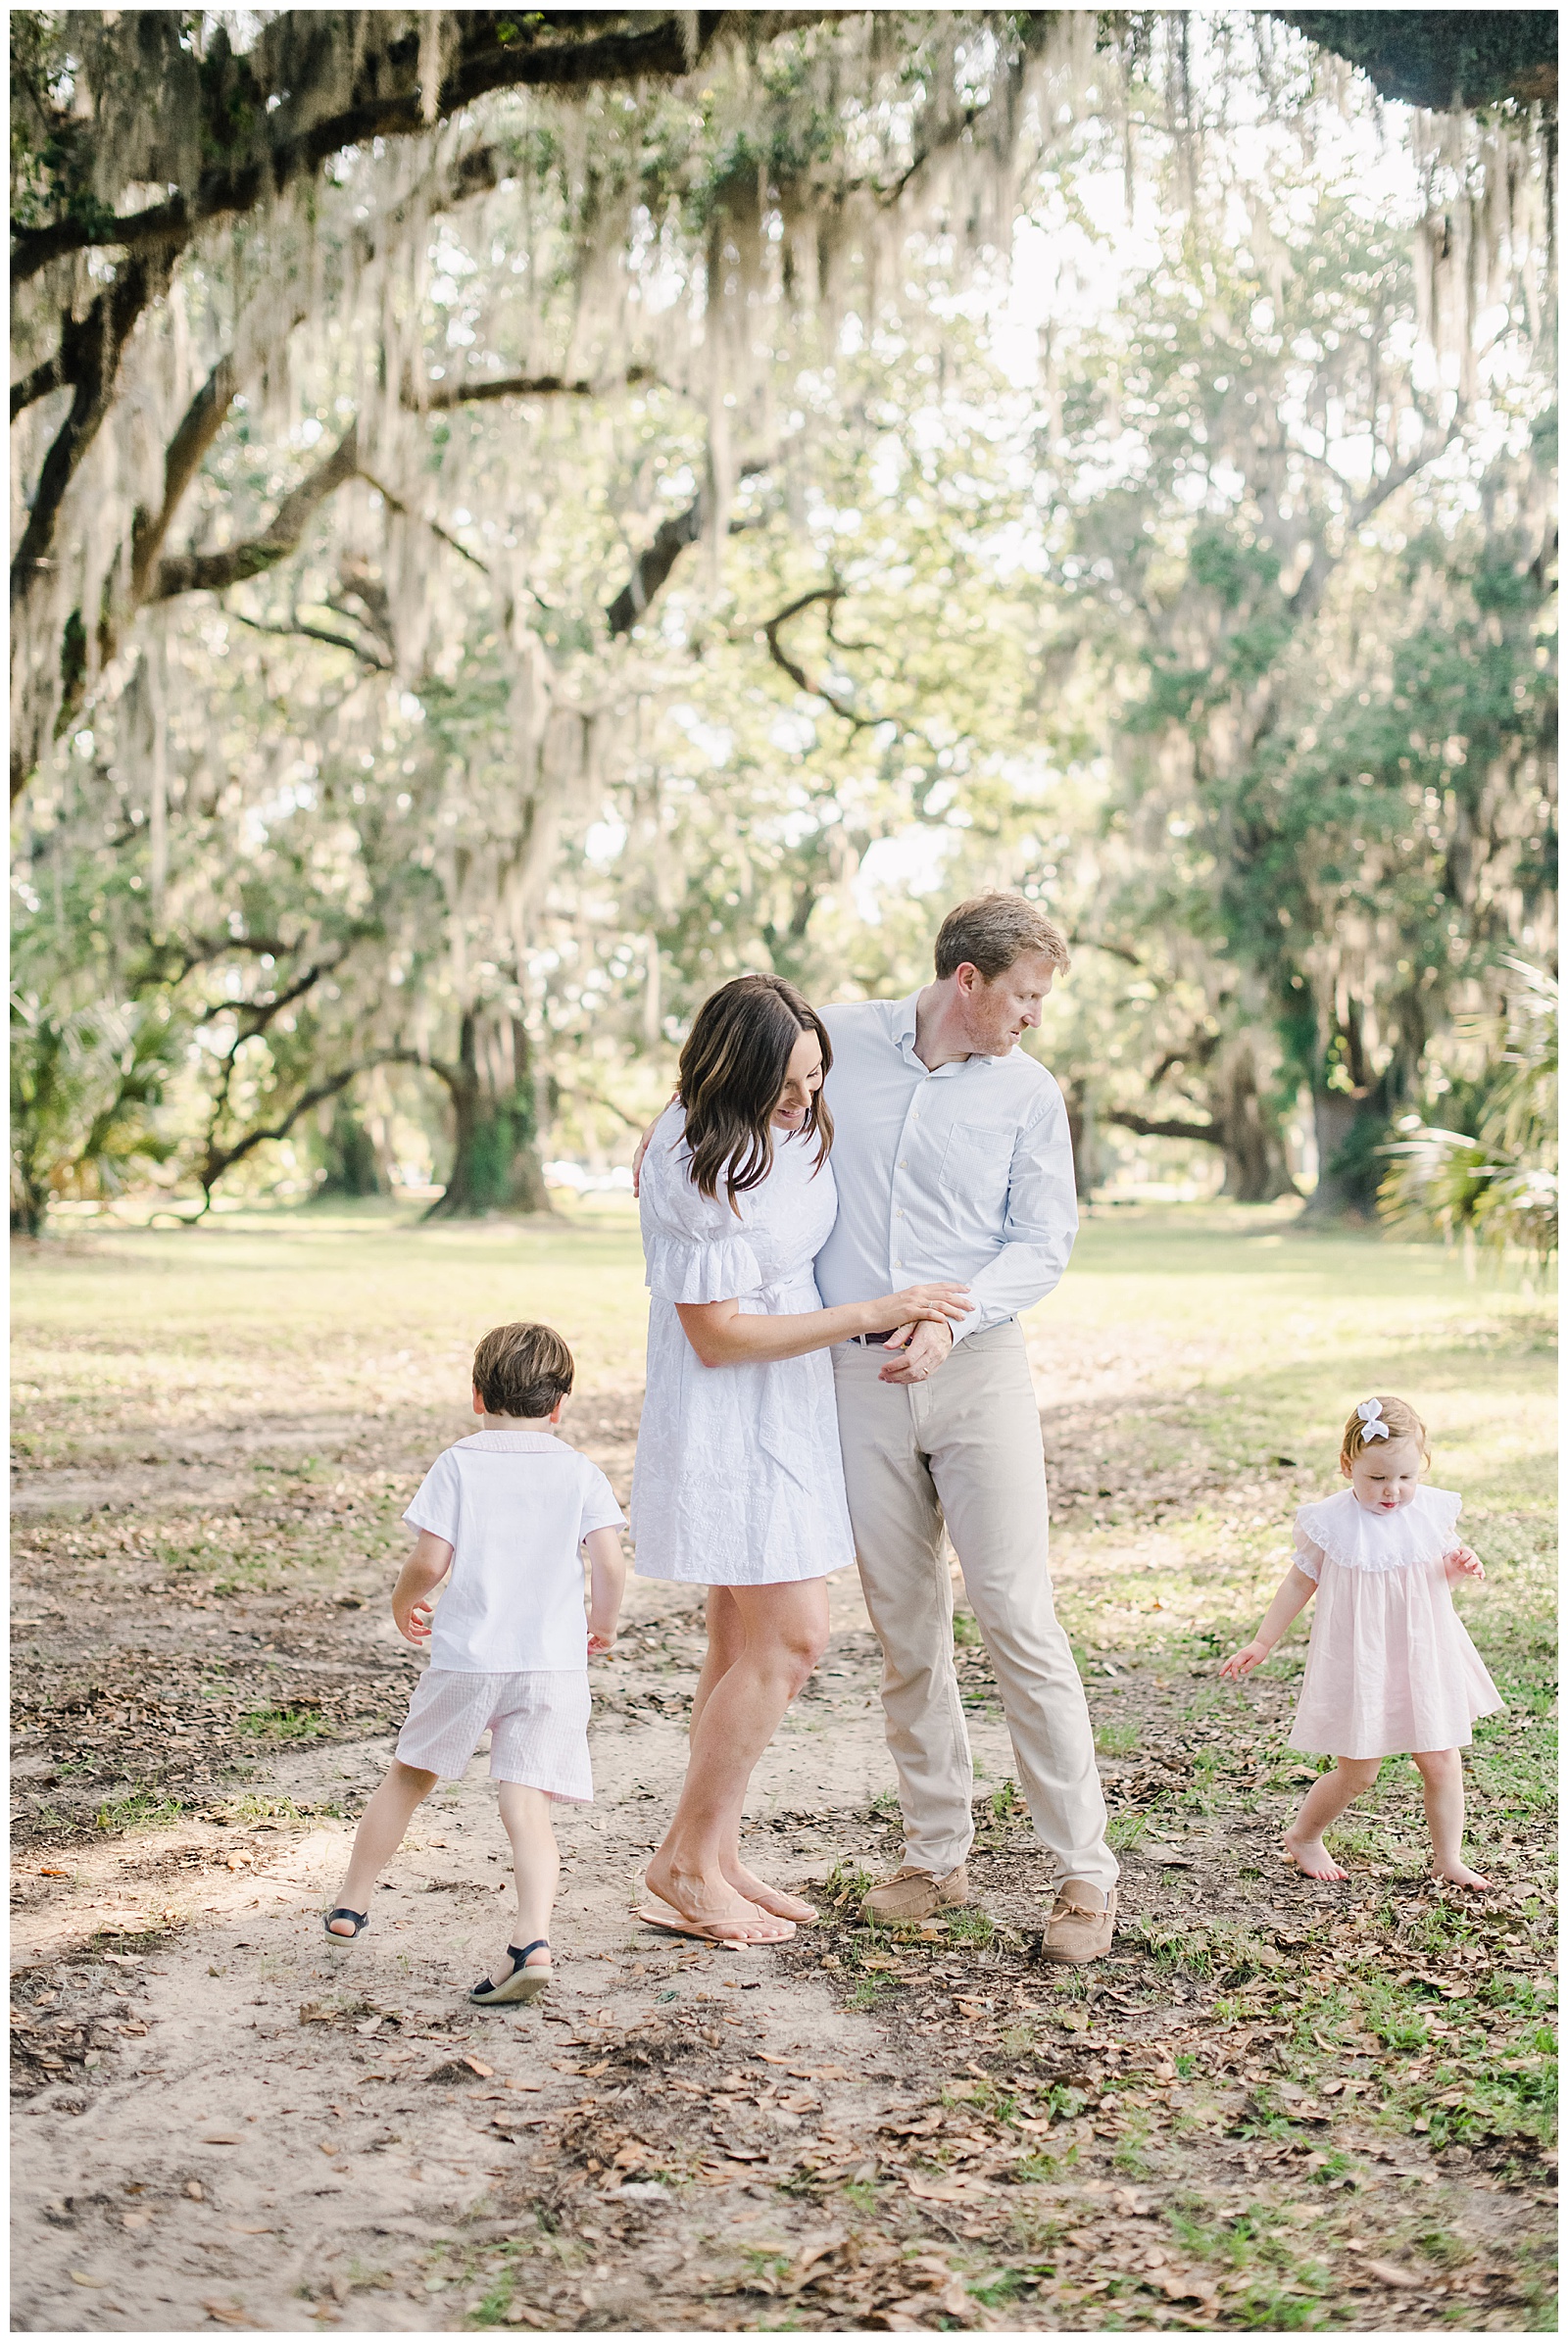 New Orleans Family Photographer Chelsea Rousey Photography kids play ring around the rosie while mom and dad watch